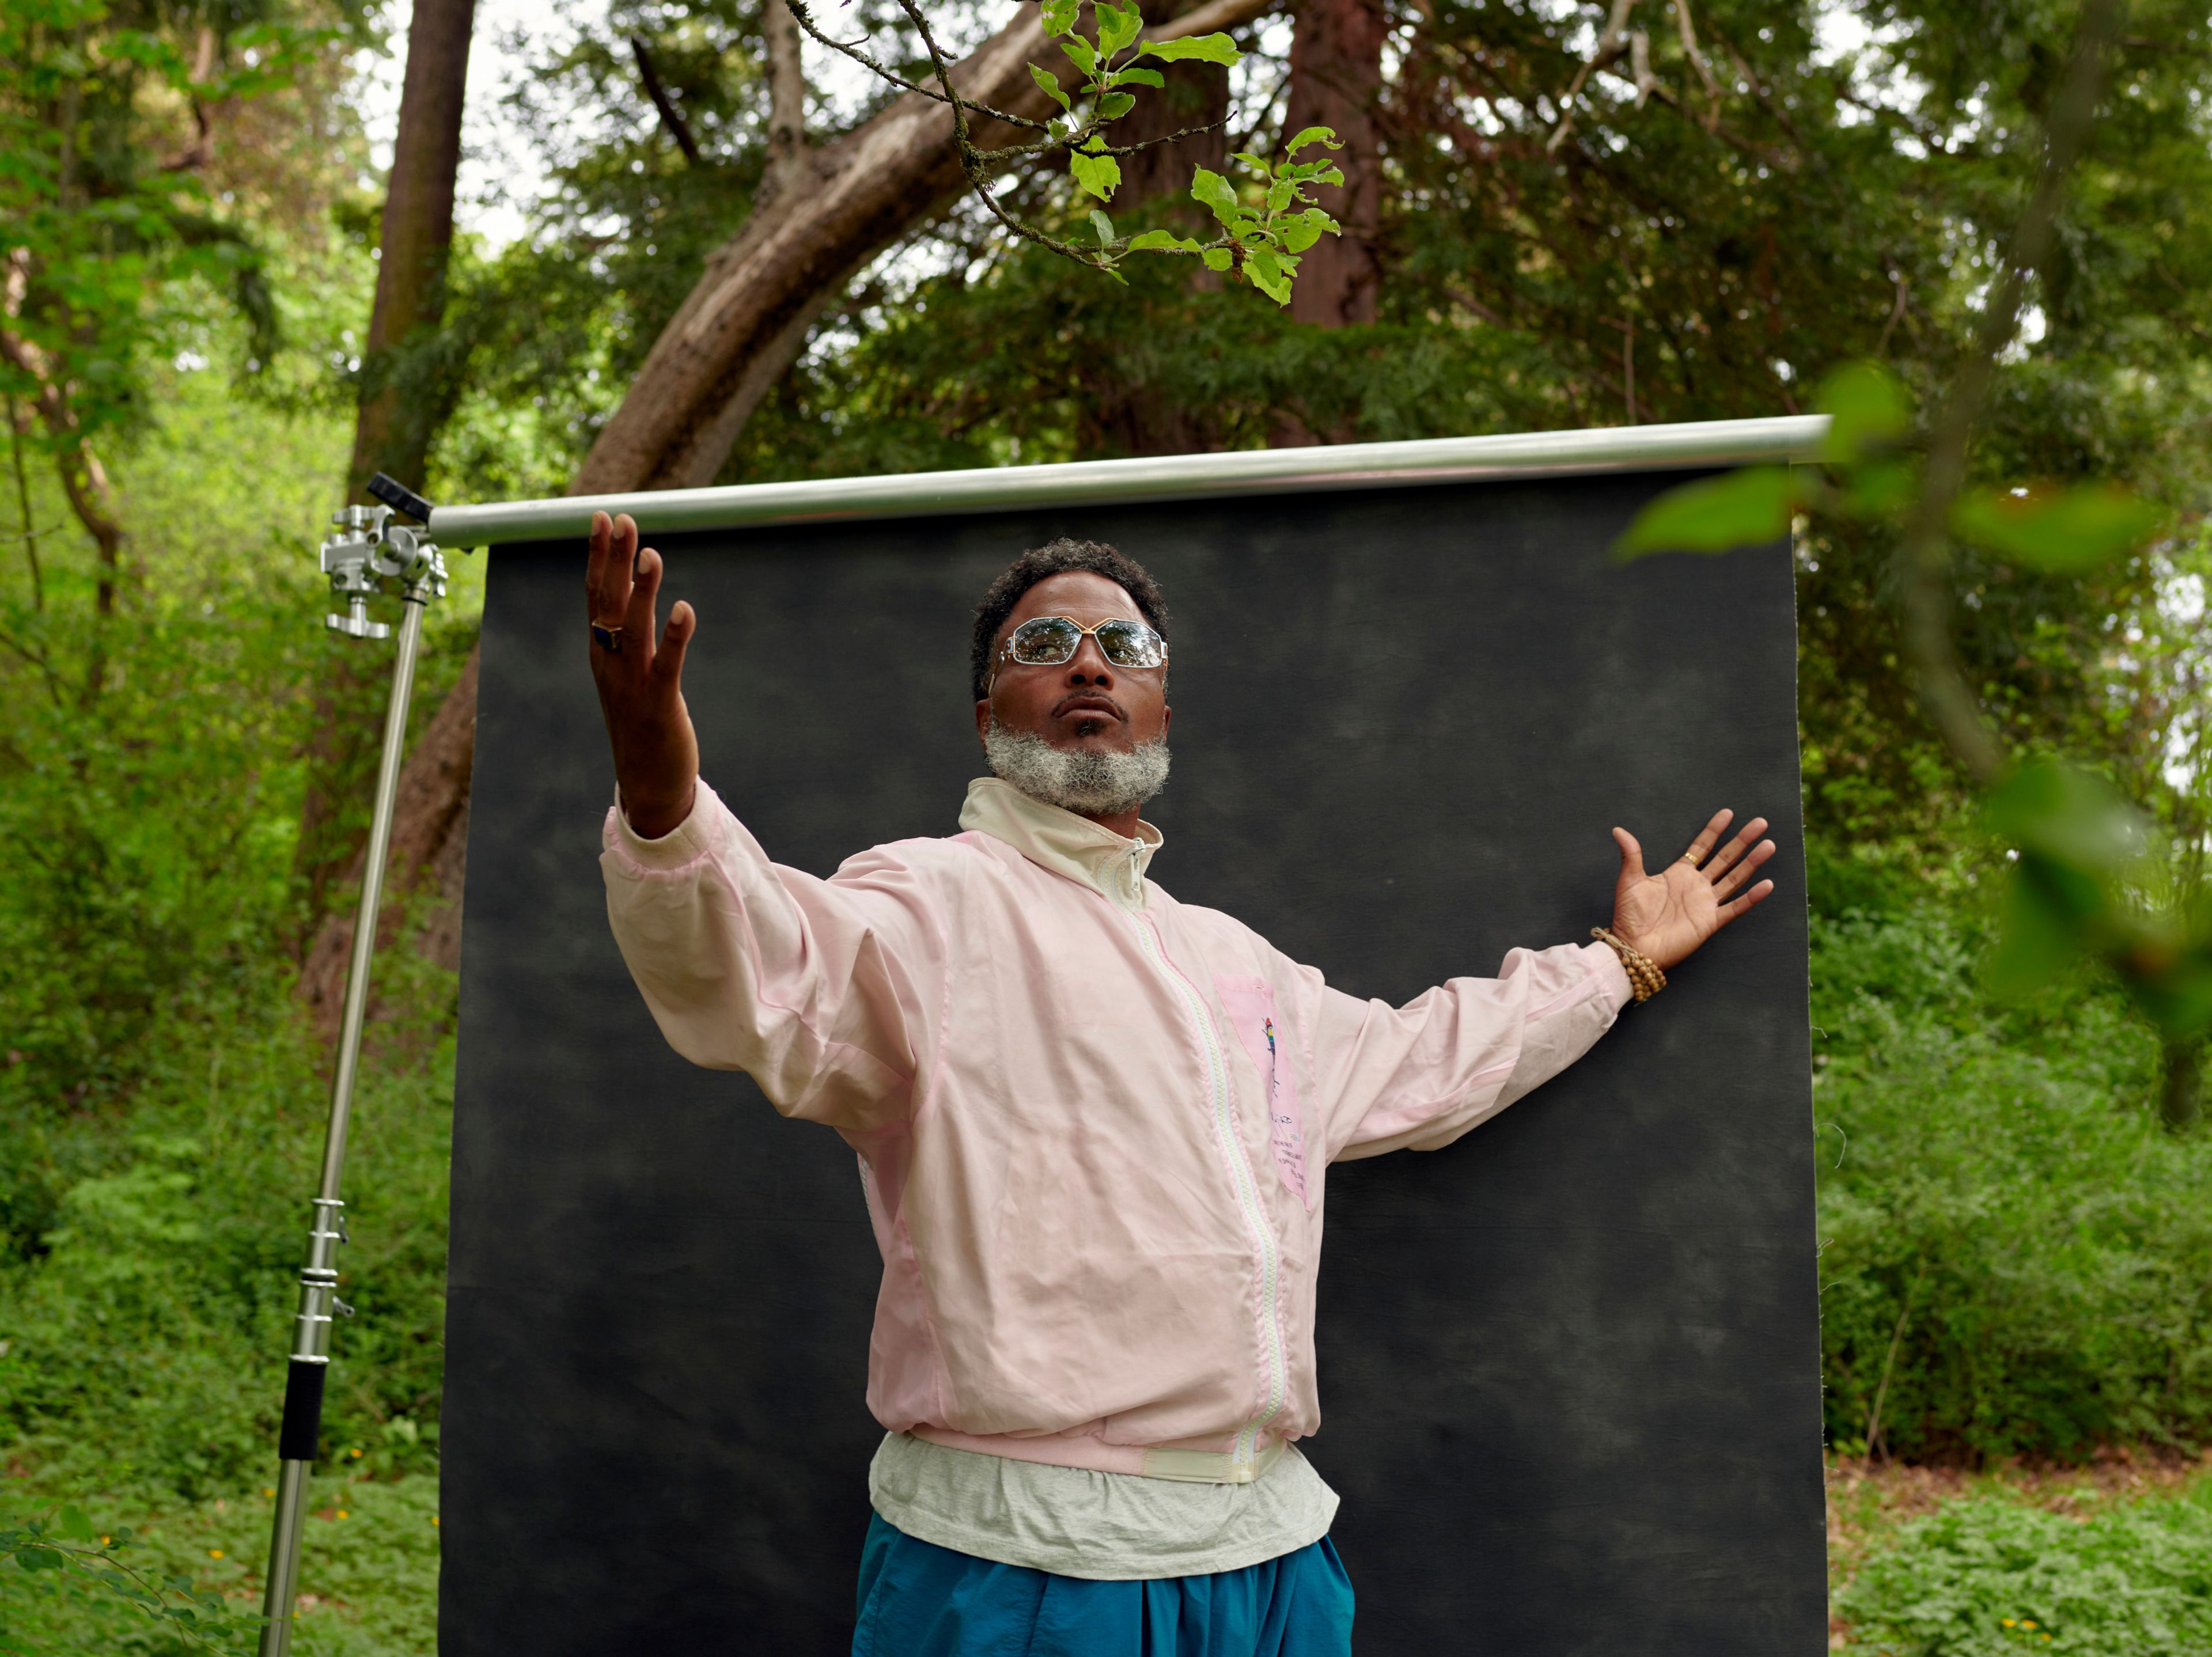 A man wearing a pink jacket and sunglasses stands with arms outstretched in front of a gray back drop surrounded by greenery